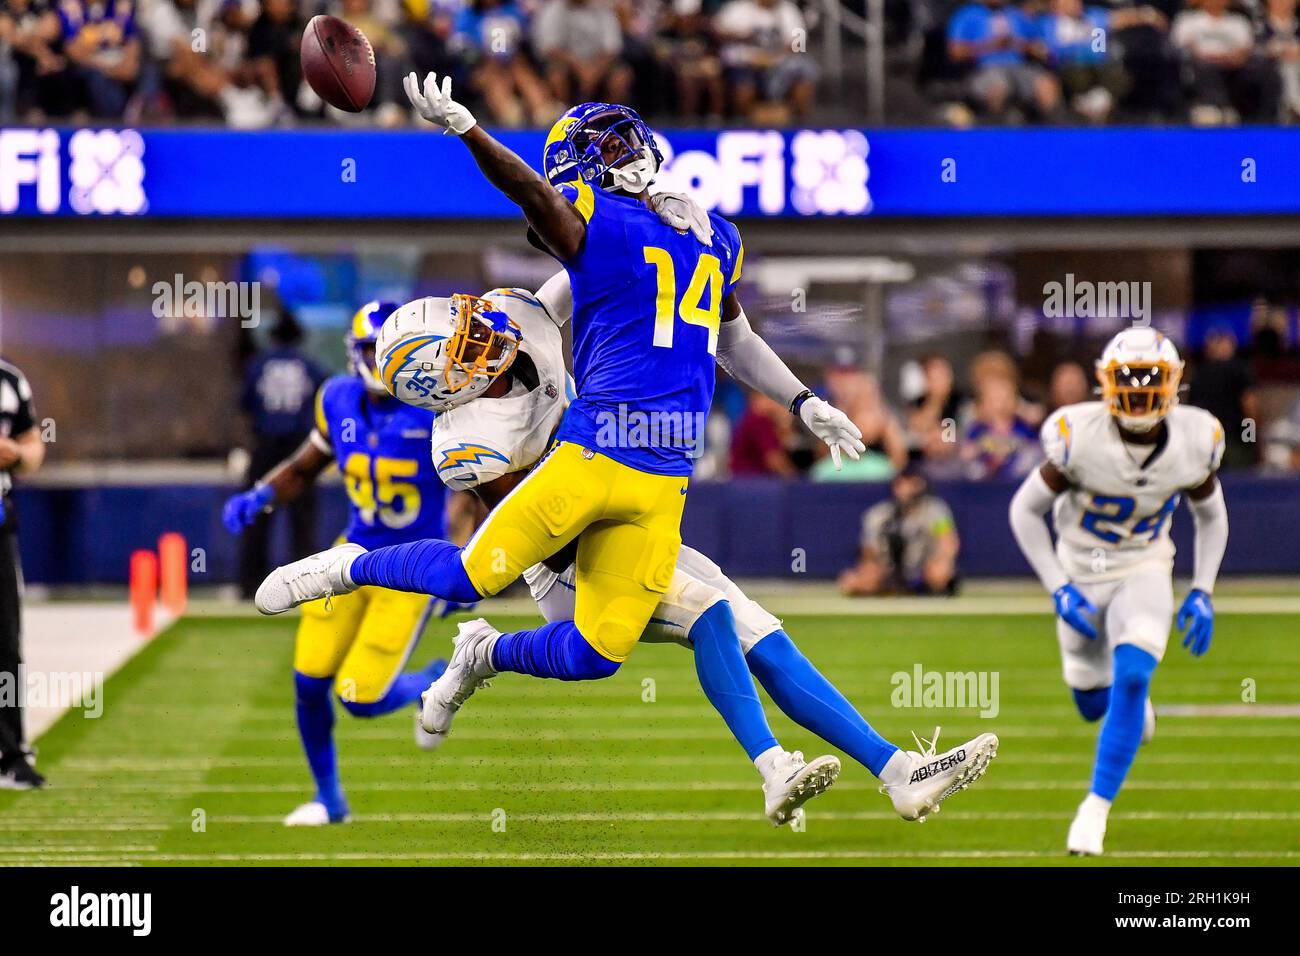 Los Angeles Rams wide receiver Tyler Johnson (14) reaches for the pass  while being held by Los Angeles Chargers cornerback AJ Uzodinma (35) in a  NFL preseason game. The Chargers defeated the